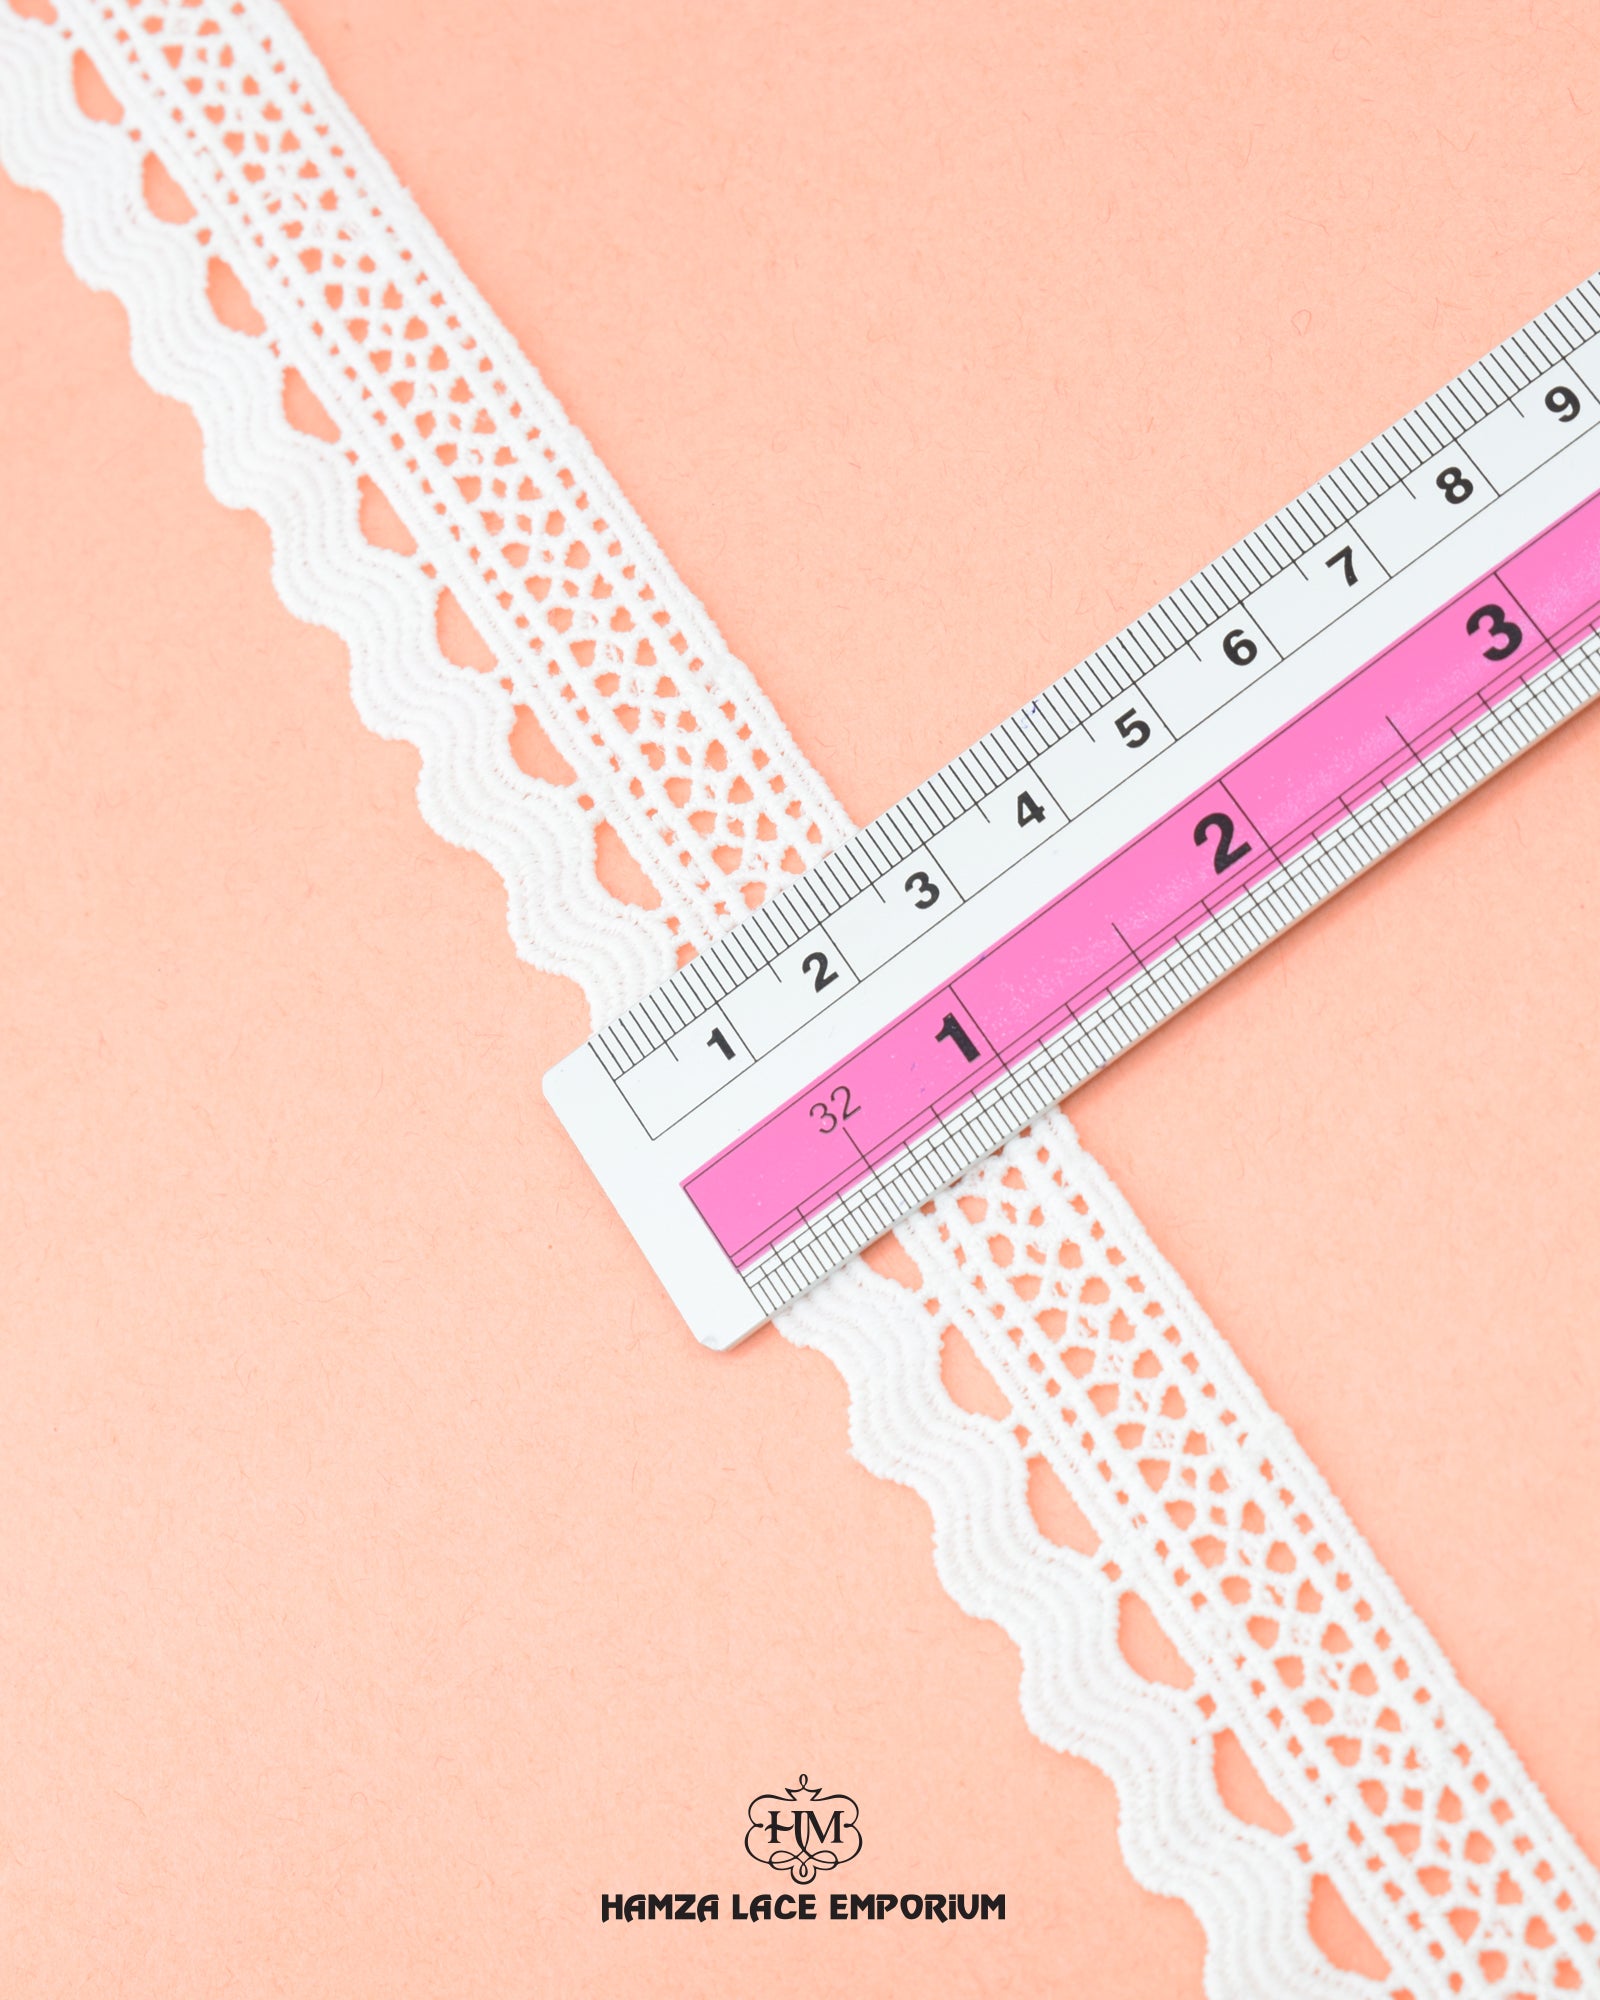 Size of the 'Edging Scallop Lace 2140' is shown as '1' inch with the help of a ruler